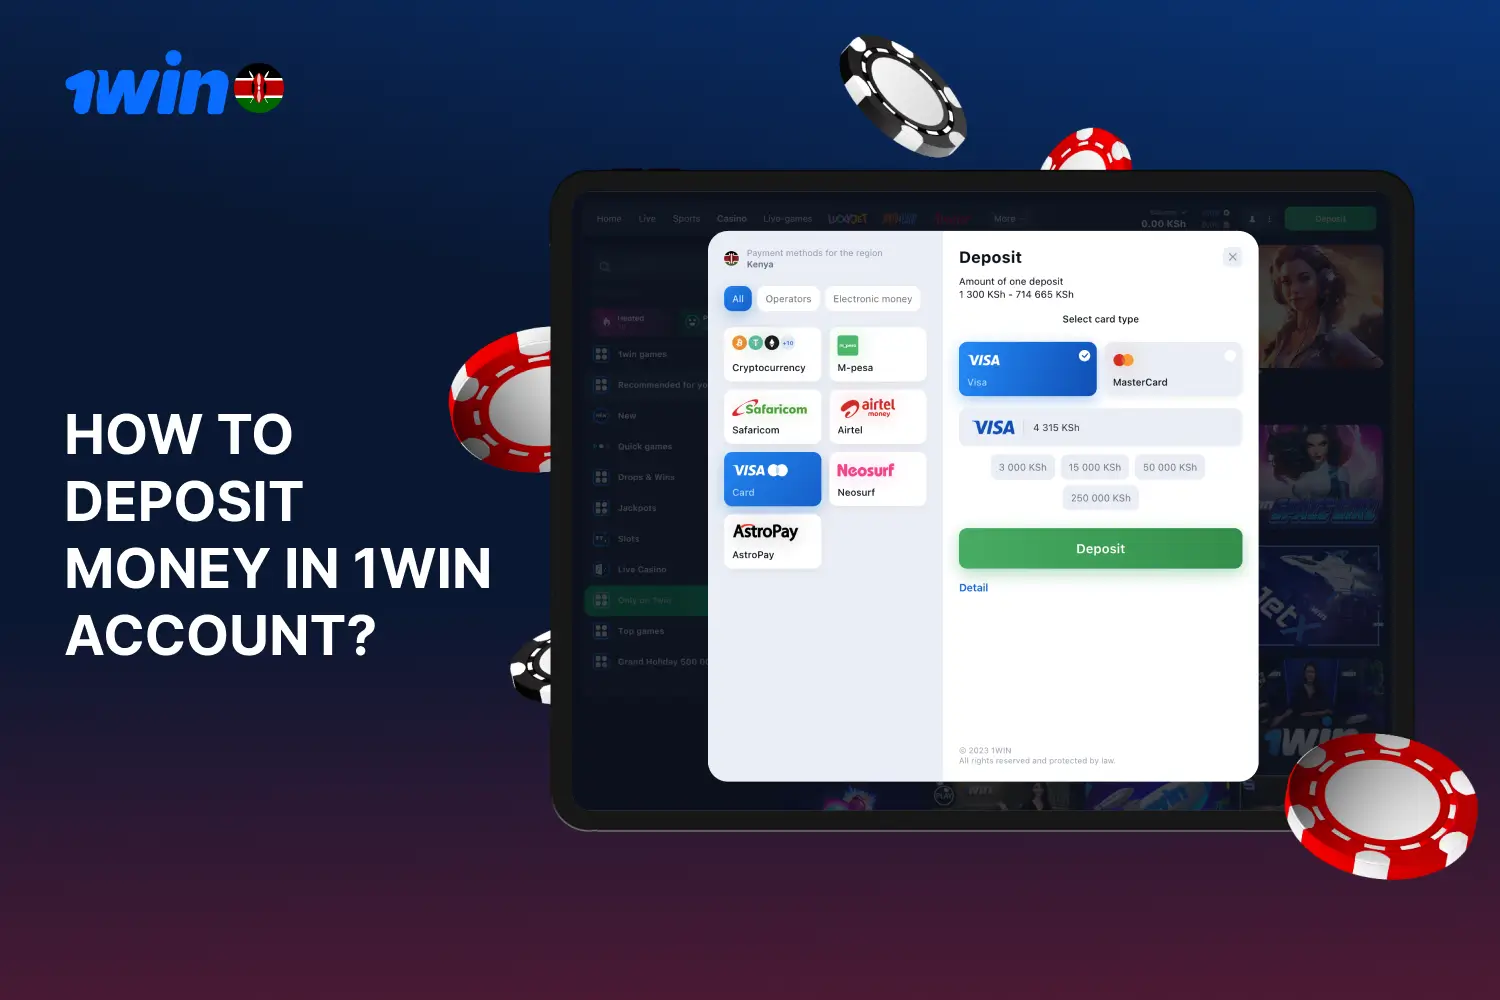 1win users in Kenya can make a deposit both on the website and in the mobile application in a few simple steps